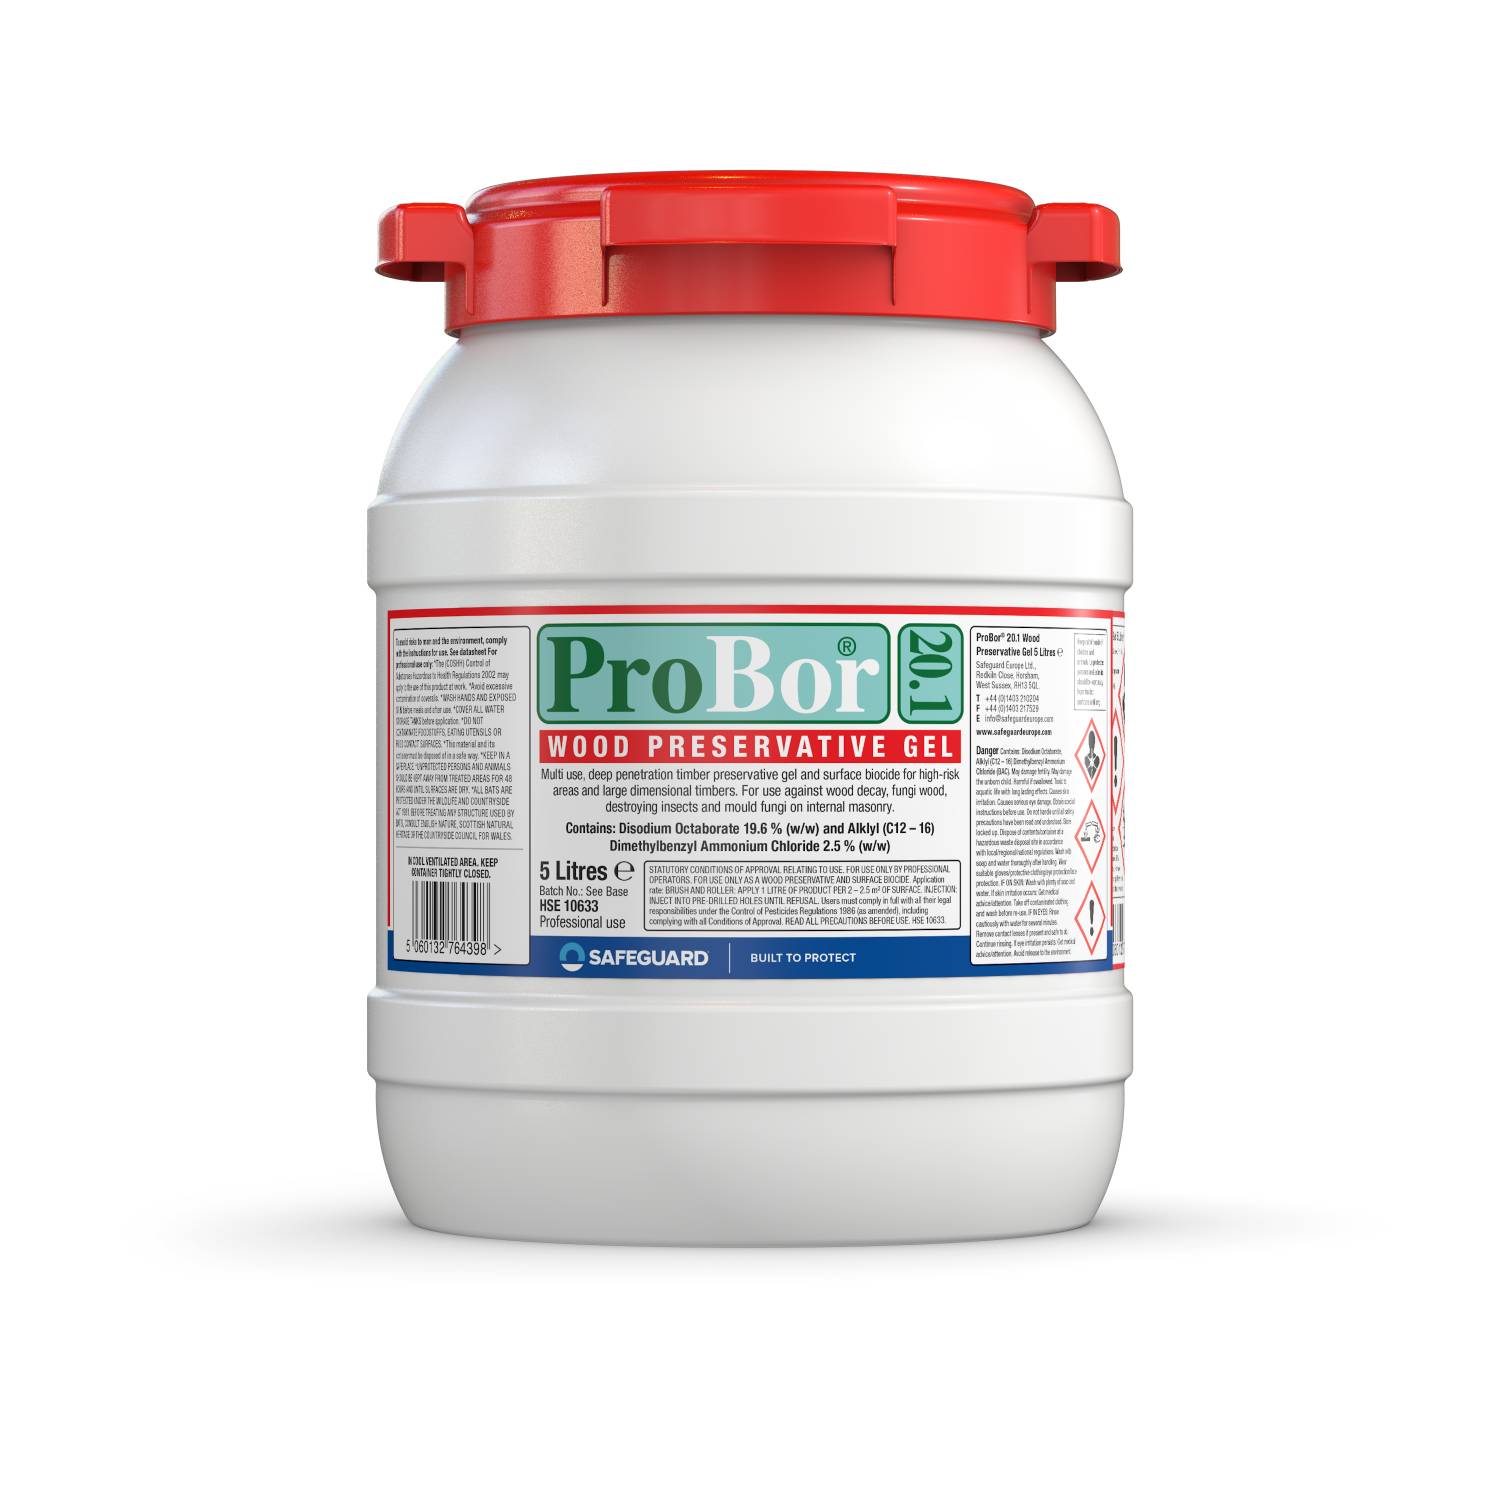 ProBor 20.1 Wood Preservative Gel: Dual Action Preservative and Surface Biocide for Treatment of Wet/Dry Rot and Wood-Boring Insects